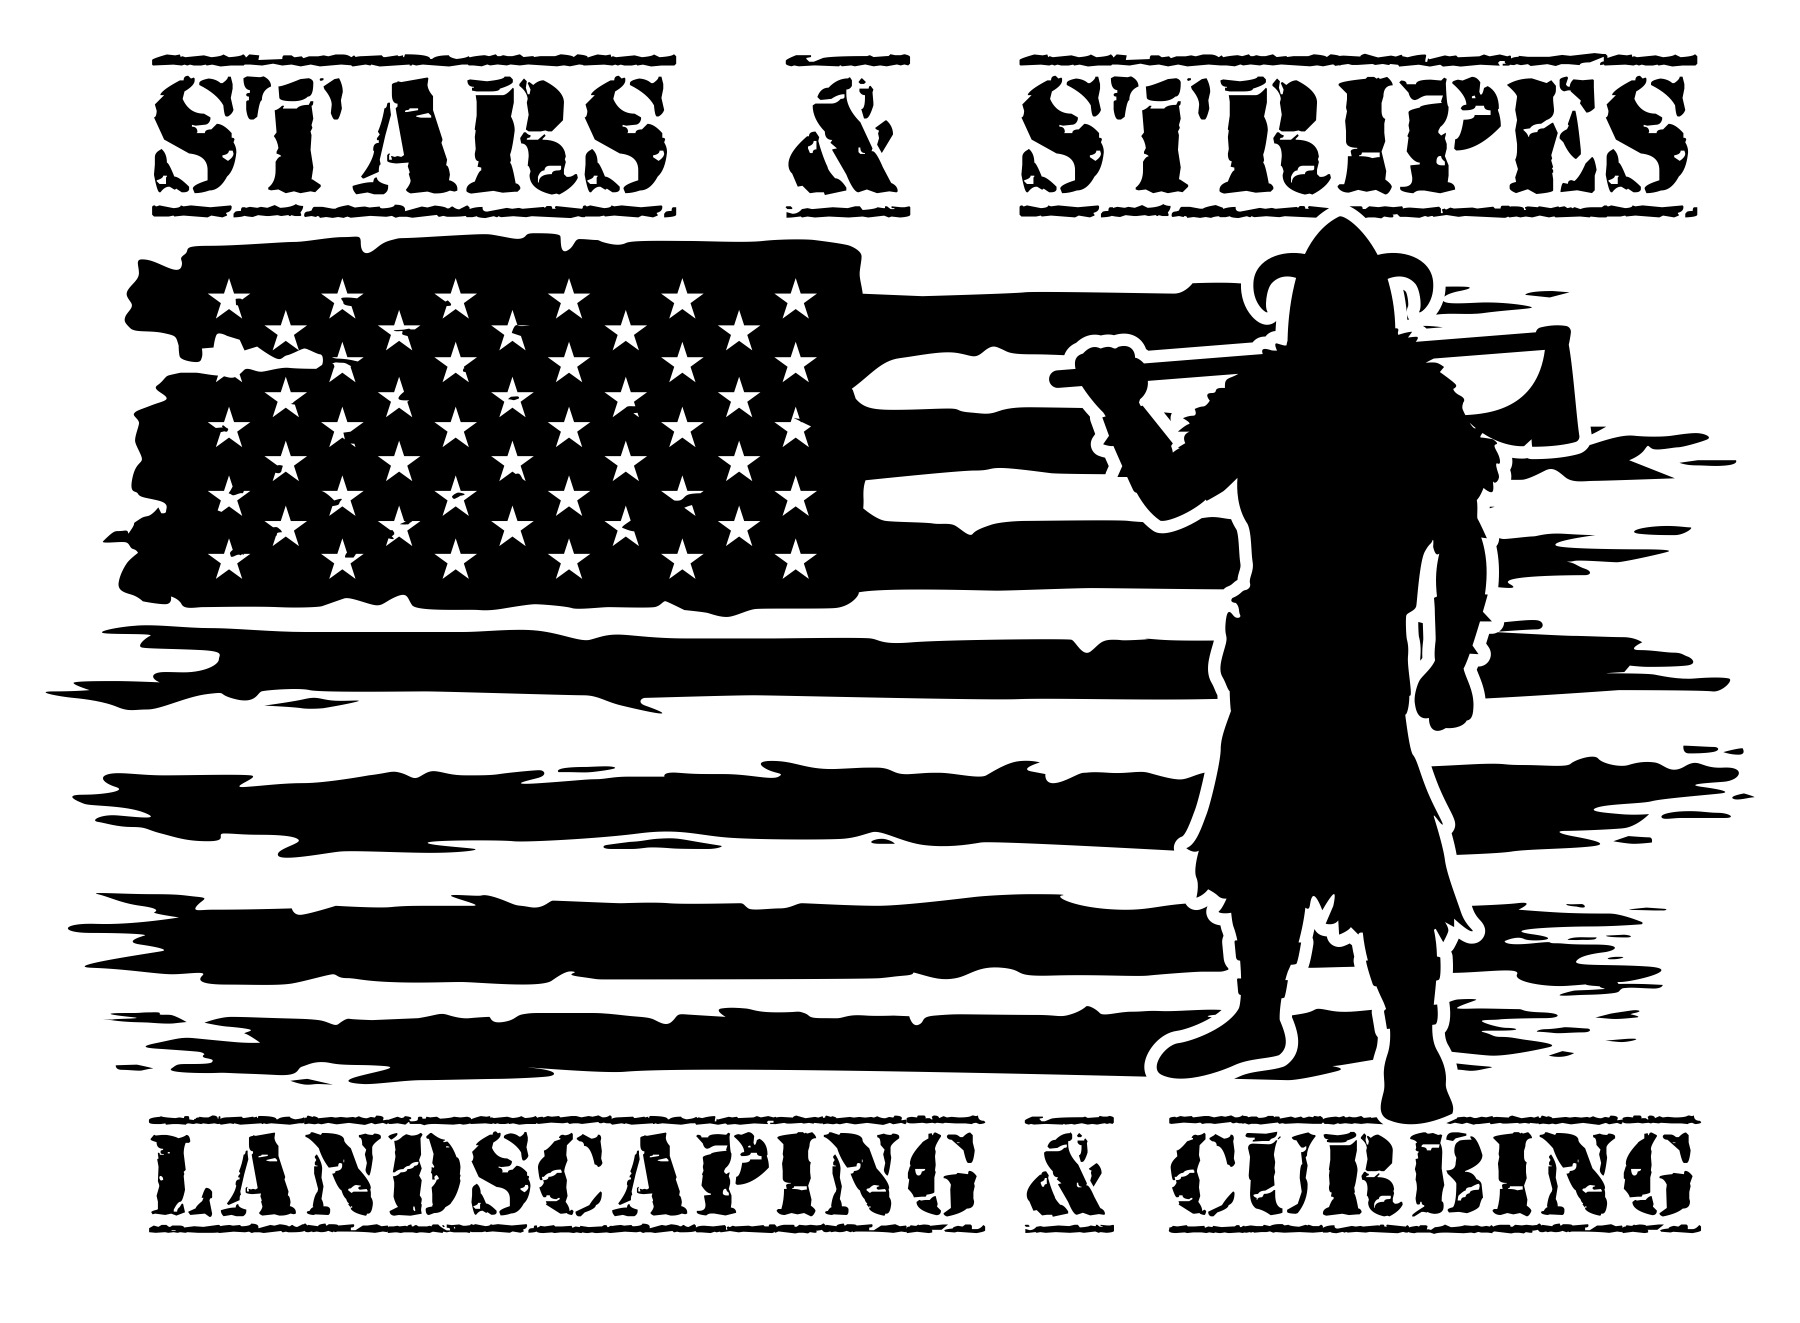 Stars and Stripes Landscaping and Curbing